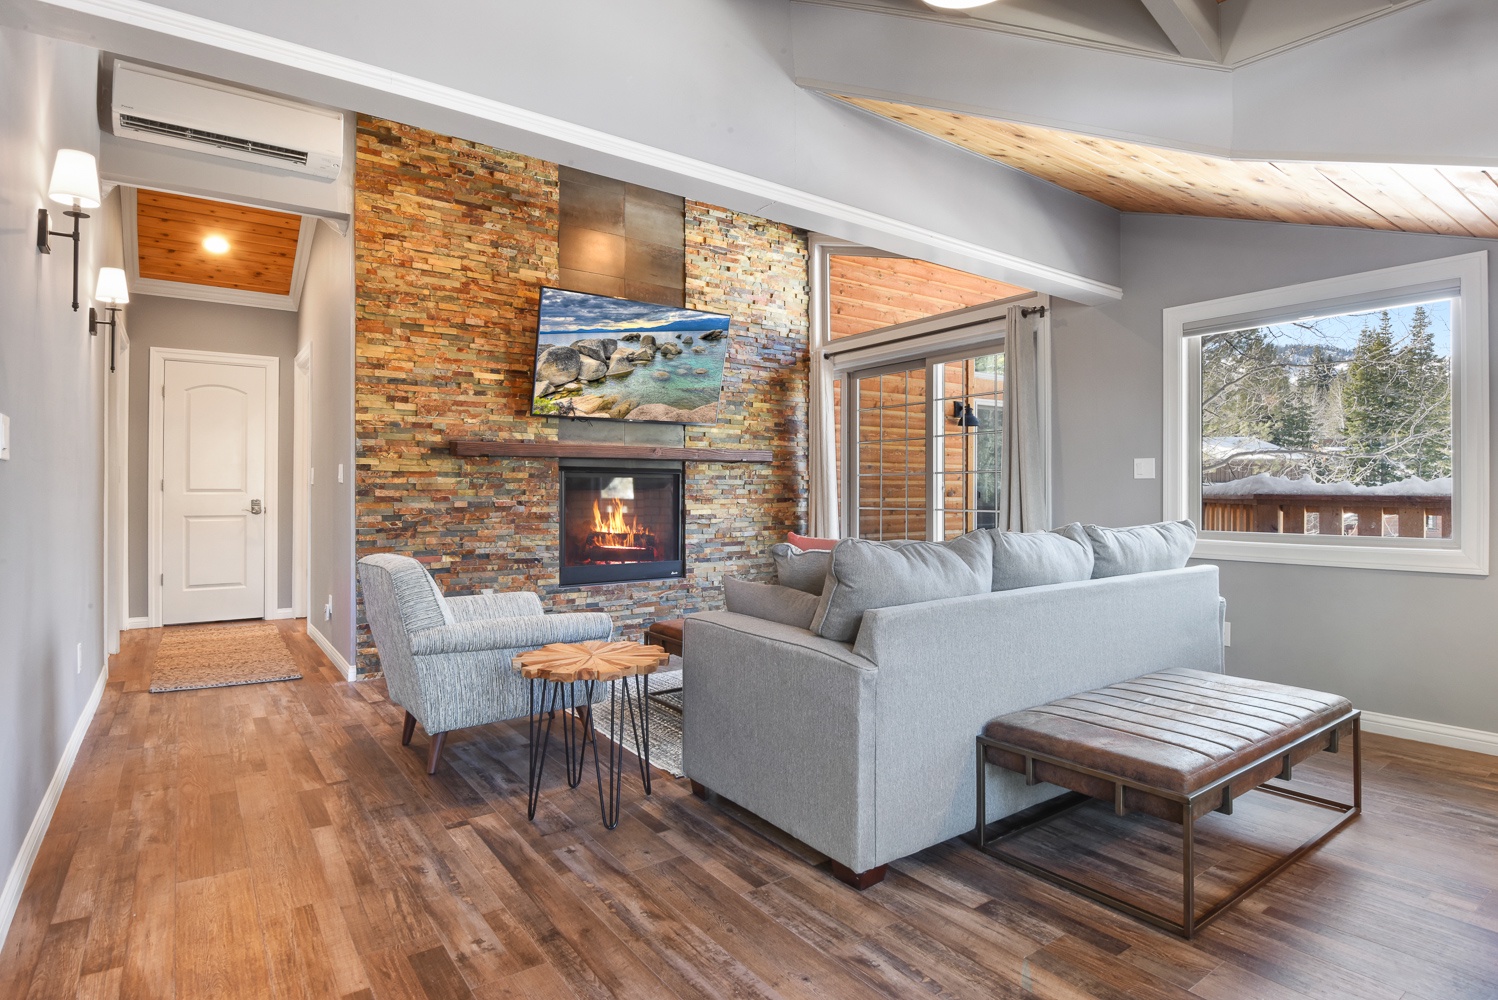 Second living area with fireplace, Smart TV, ample seating, and workspace